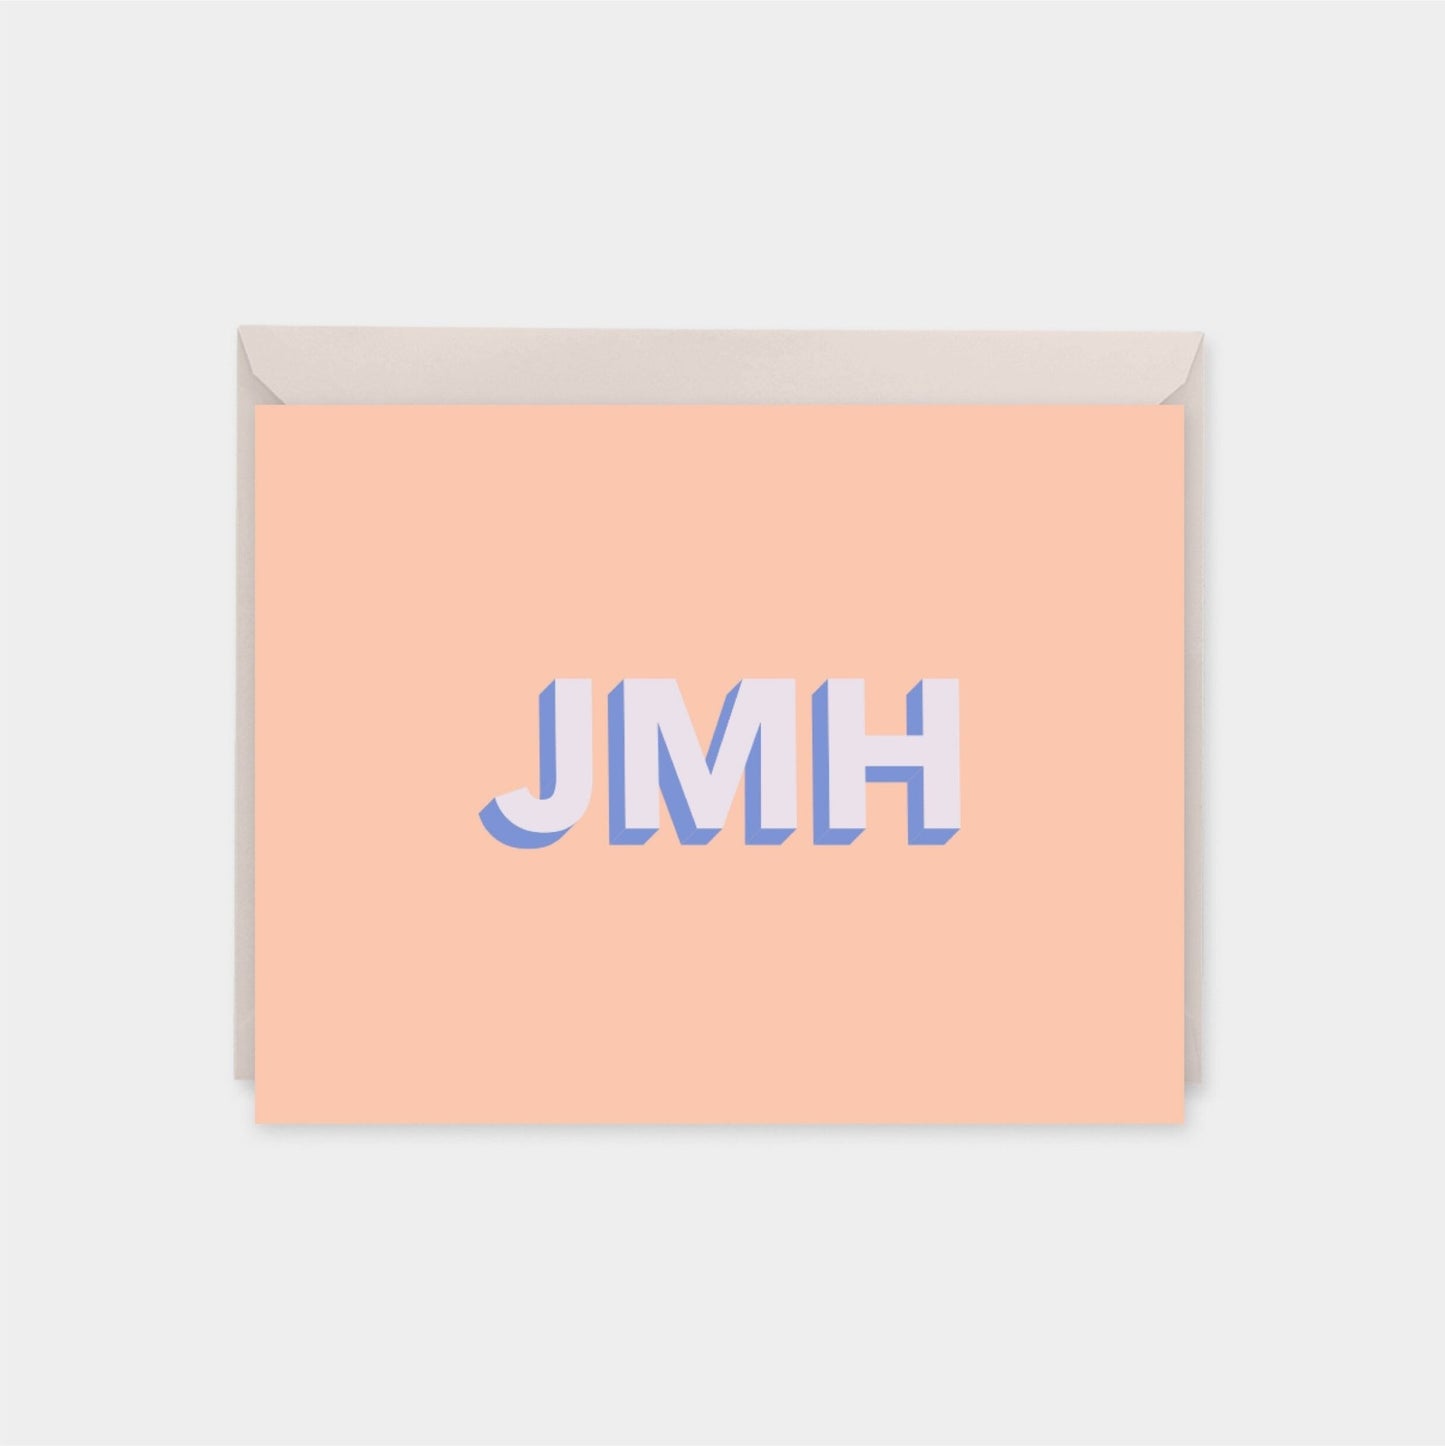 Monogram Note Cards with 3D Text, Modern